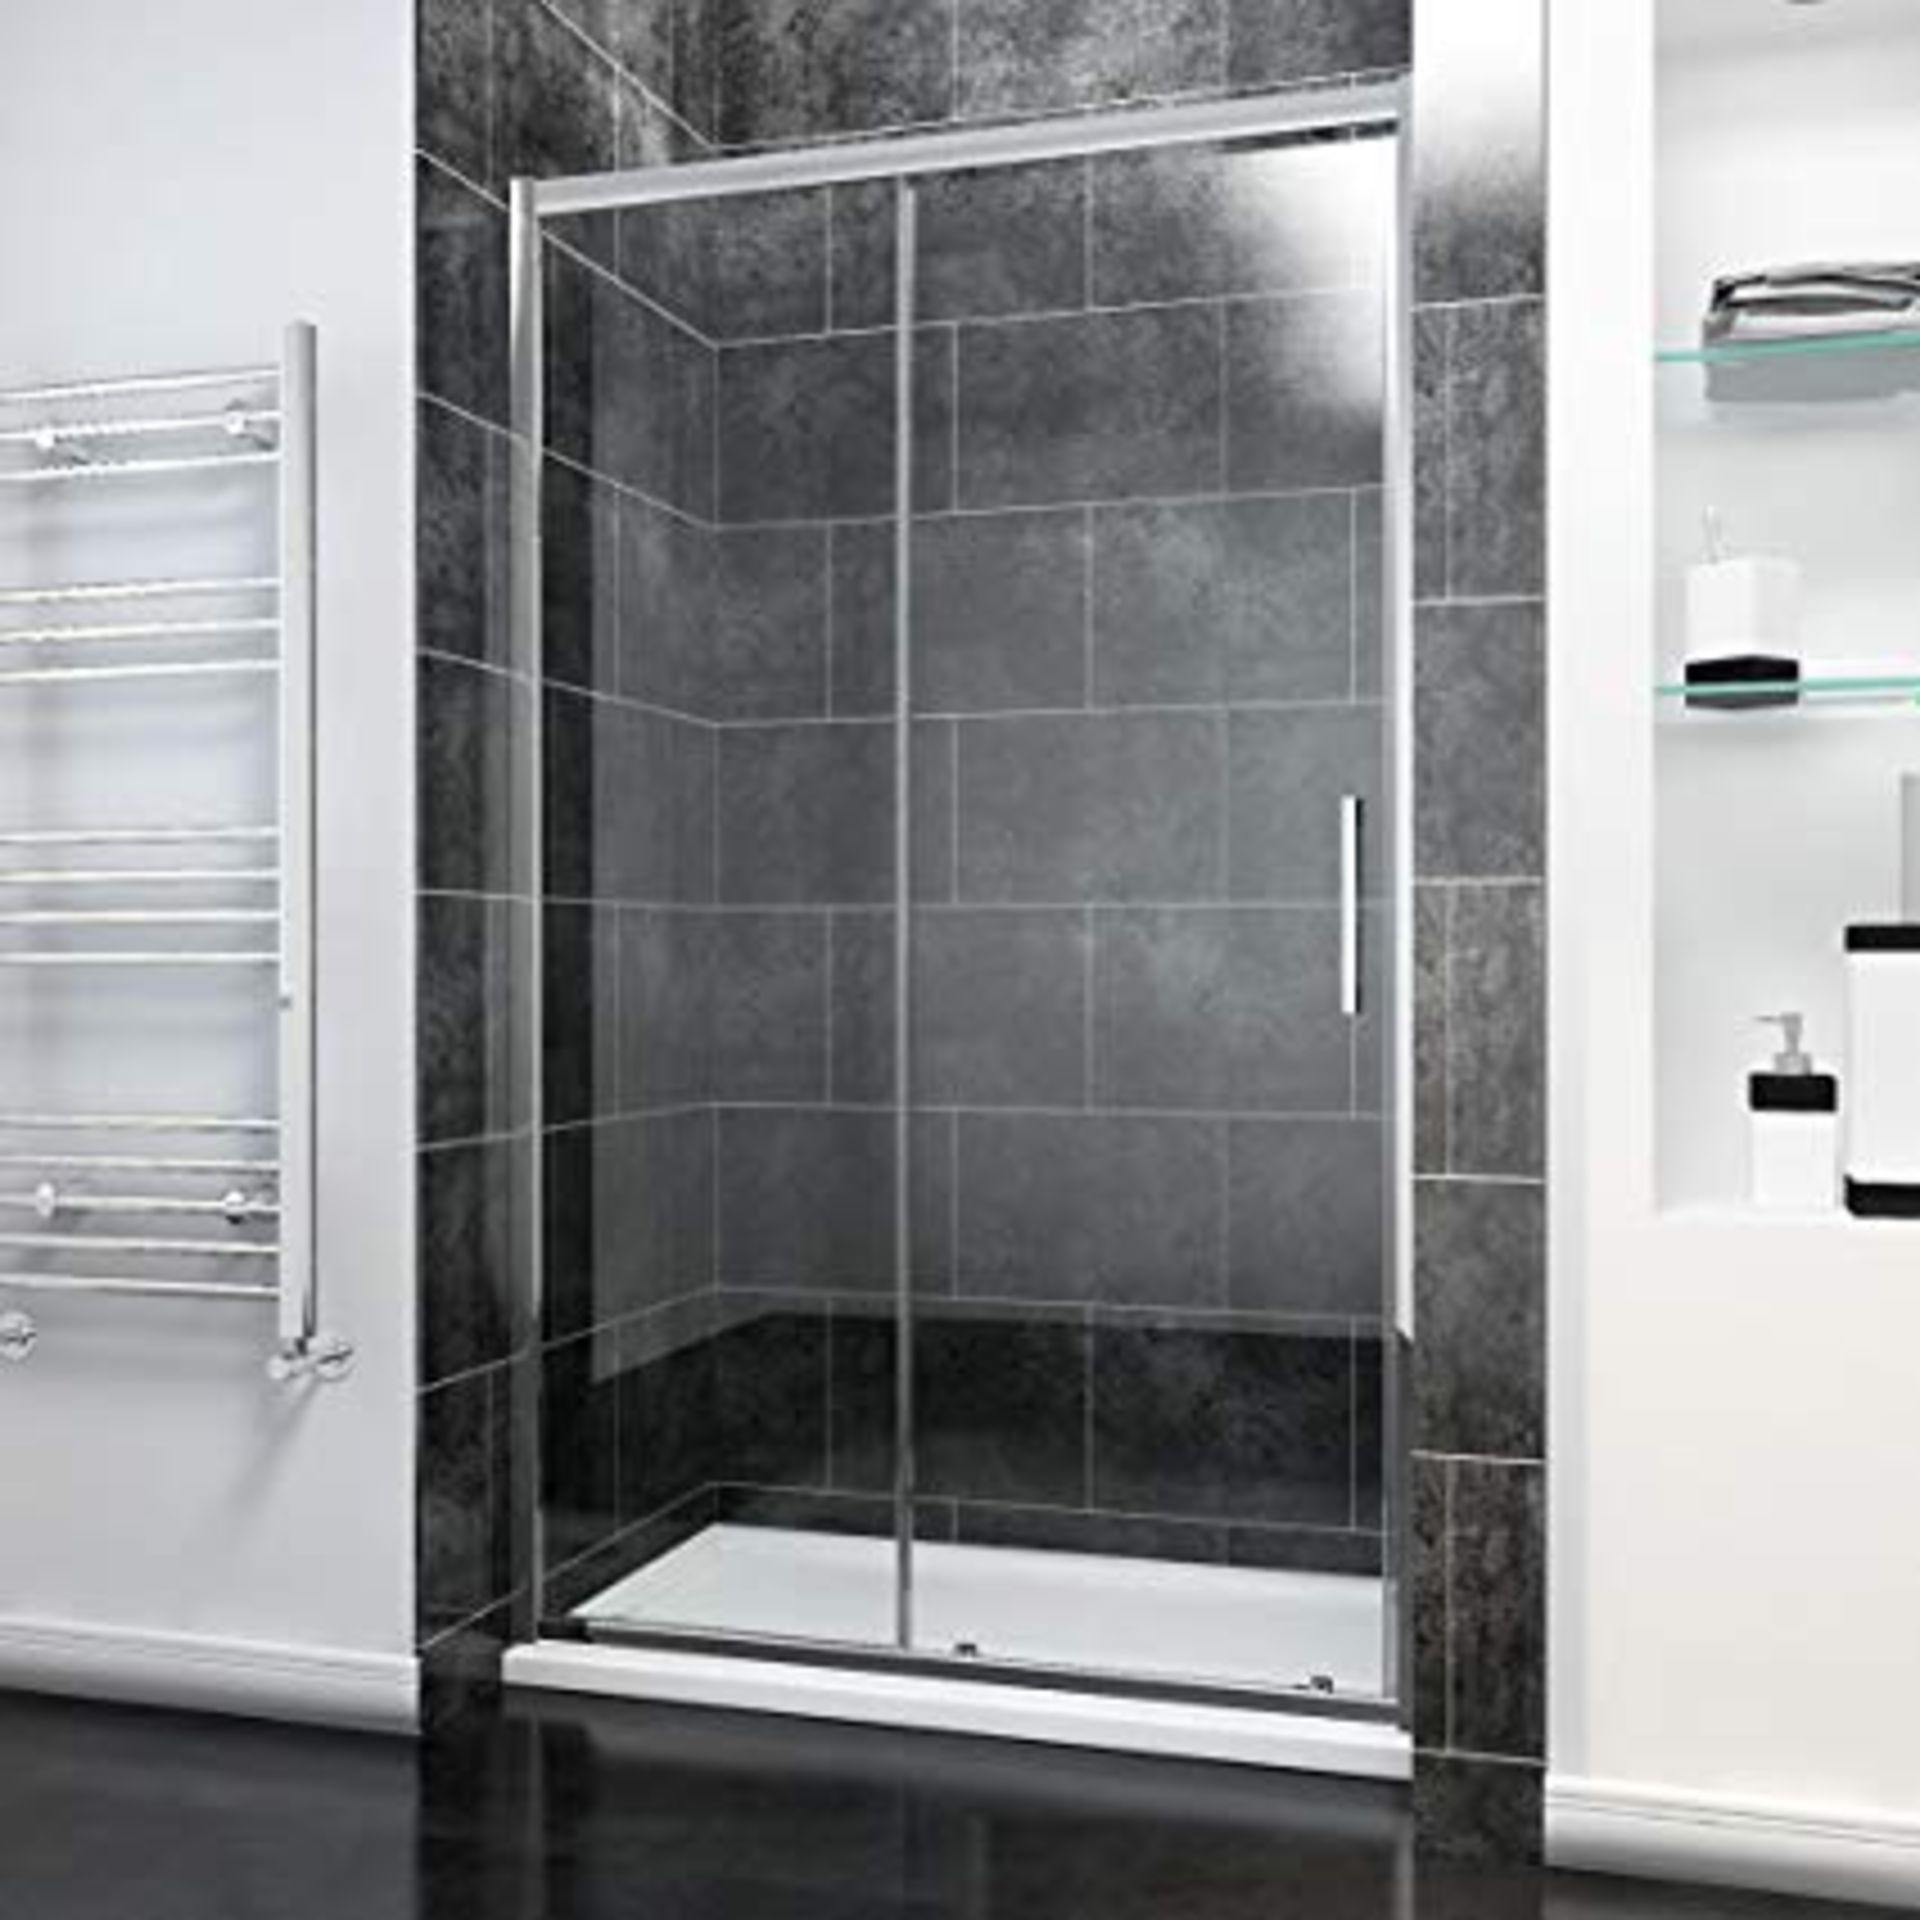 luxury 1500mm shower sliding door unit, new and boxed, RRP £257 - Image 2 of 2